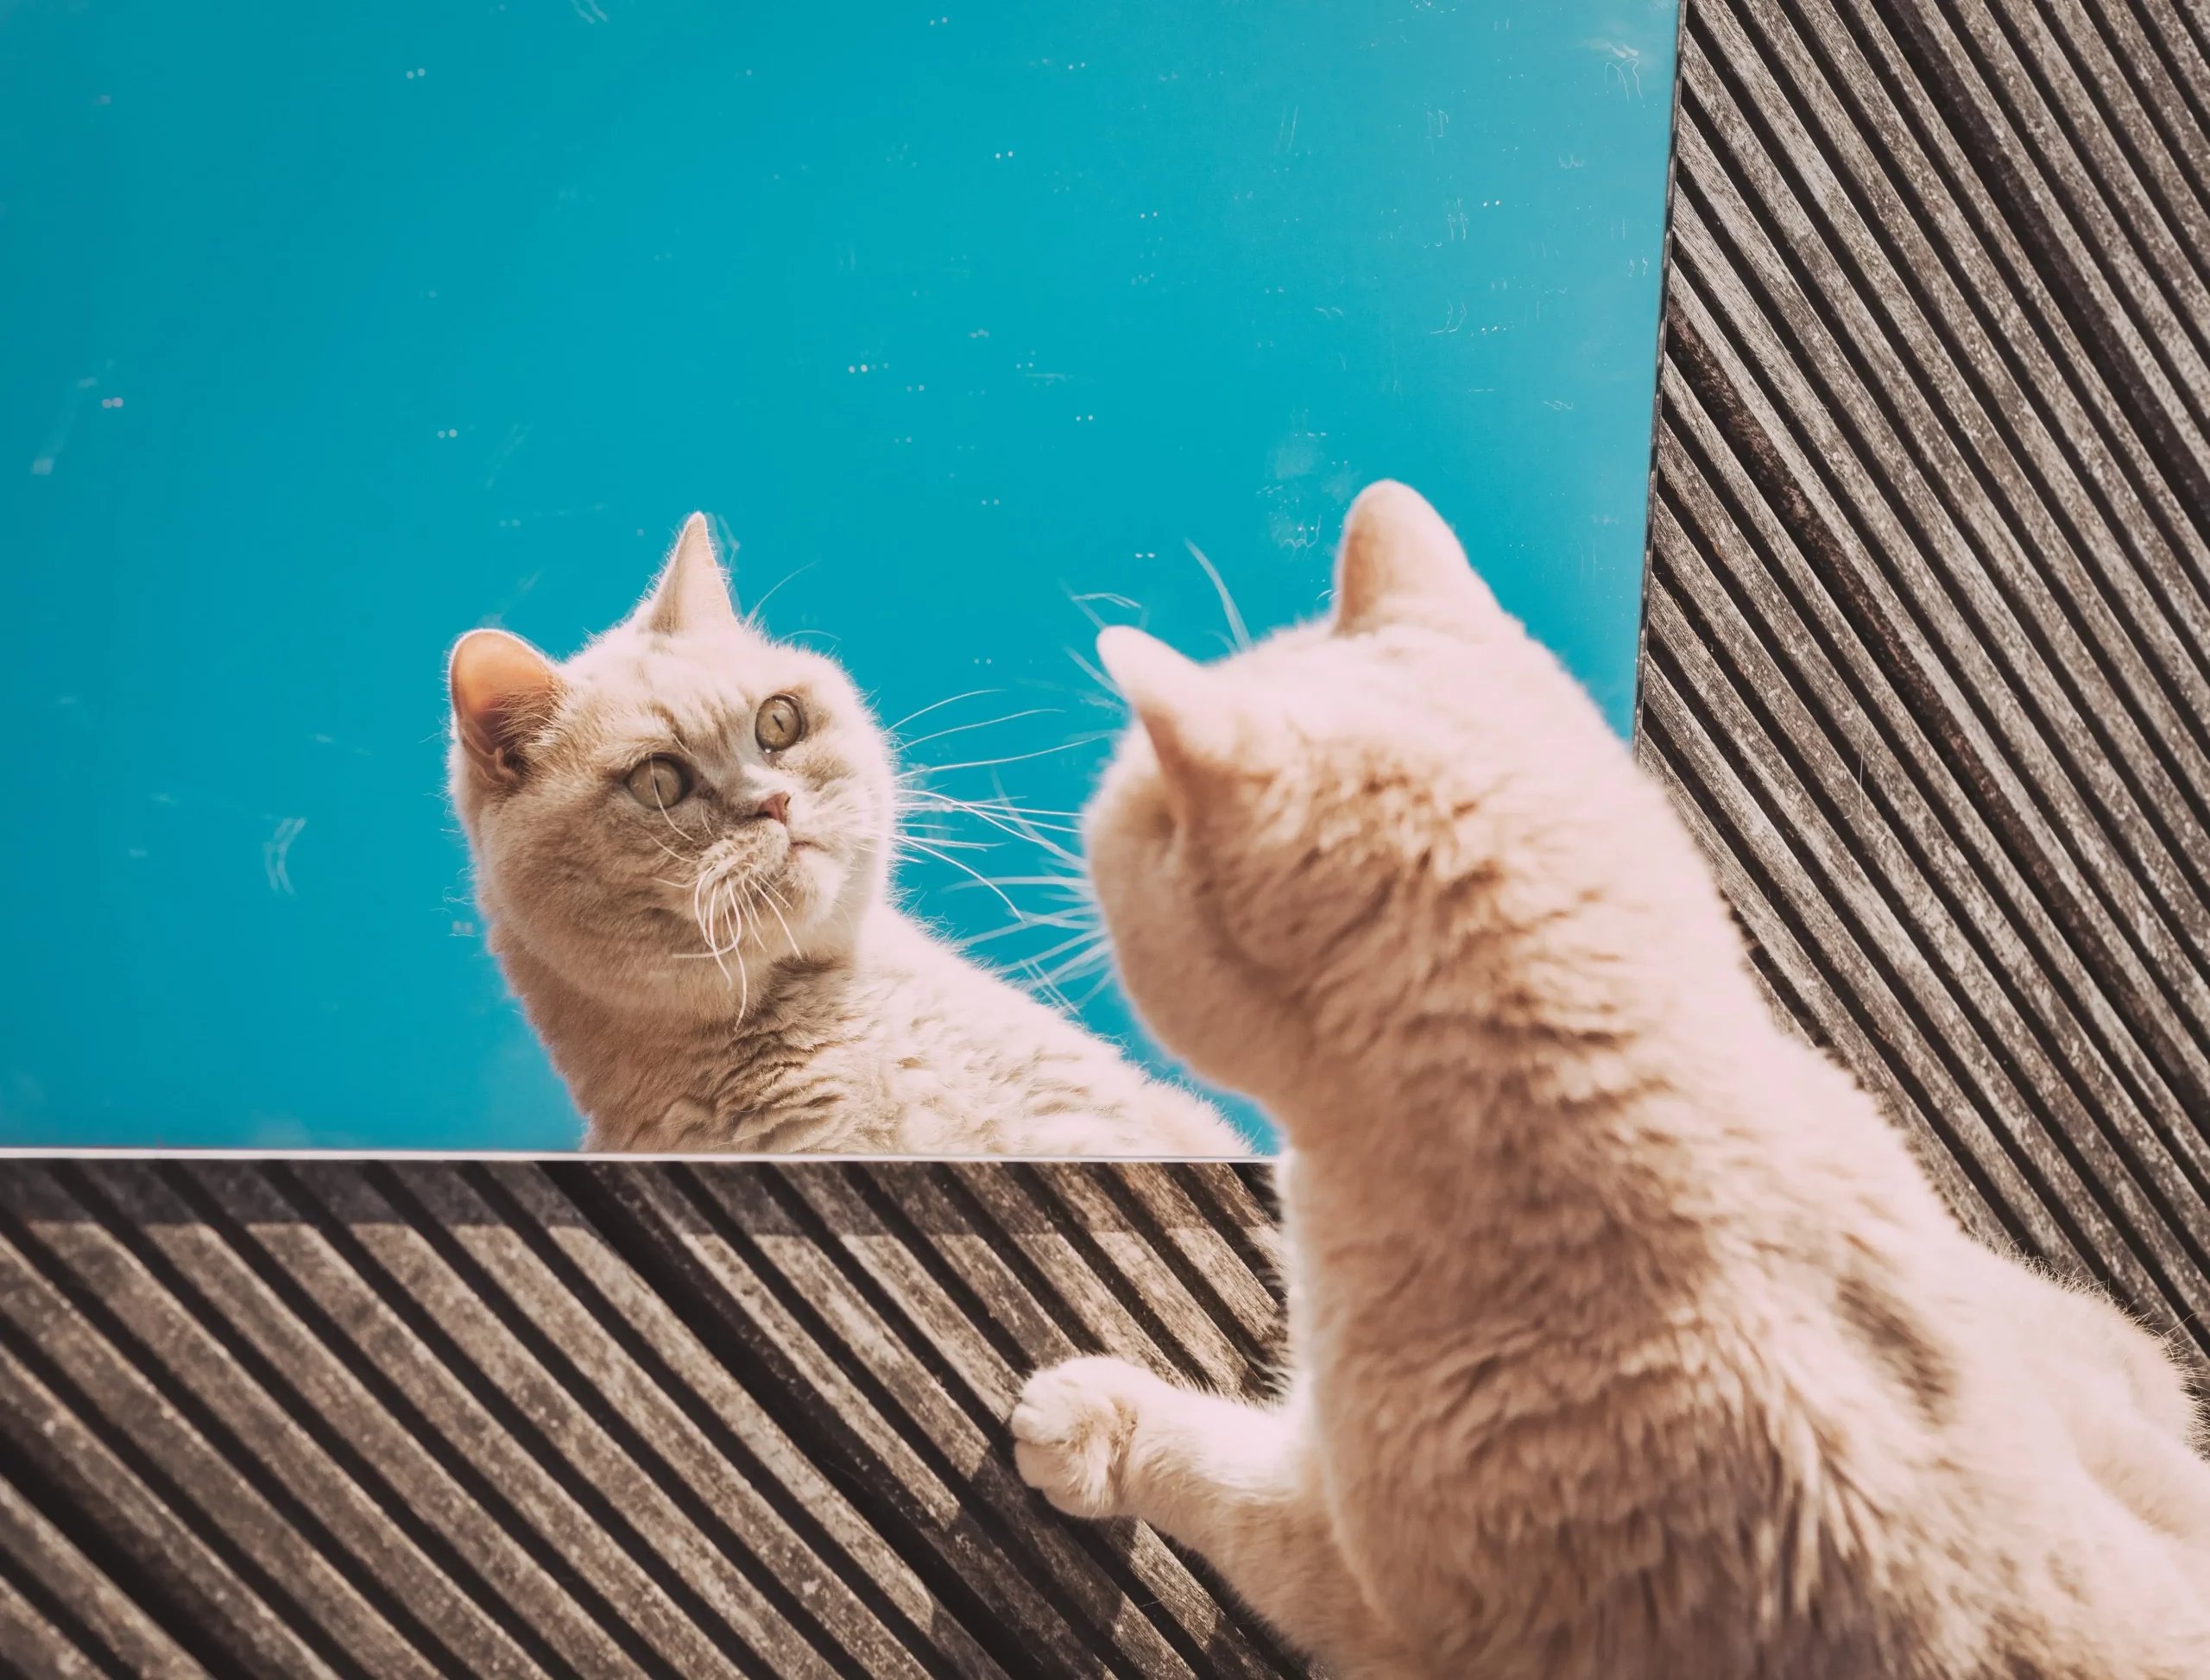 Fat cat looking in a mirror